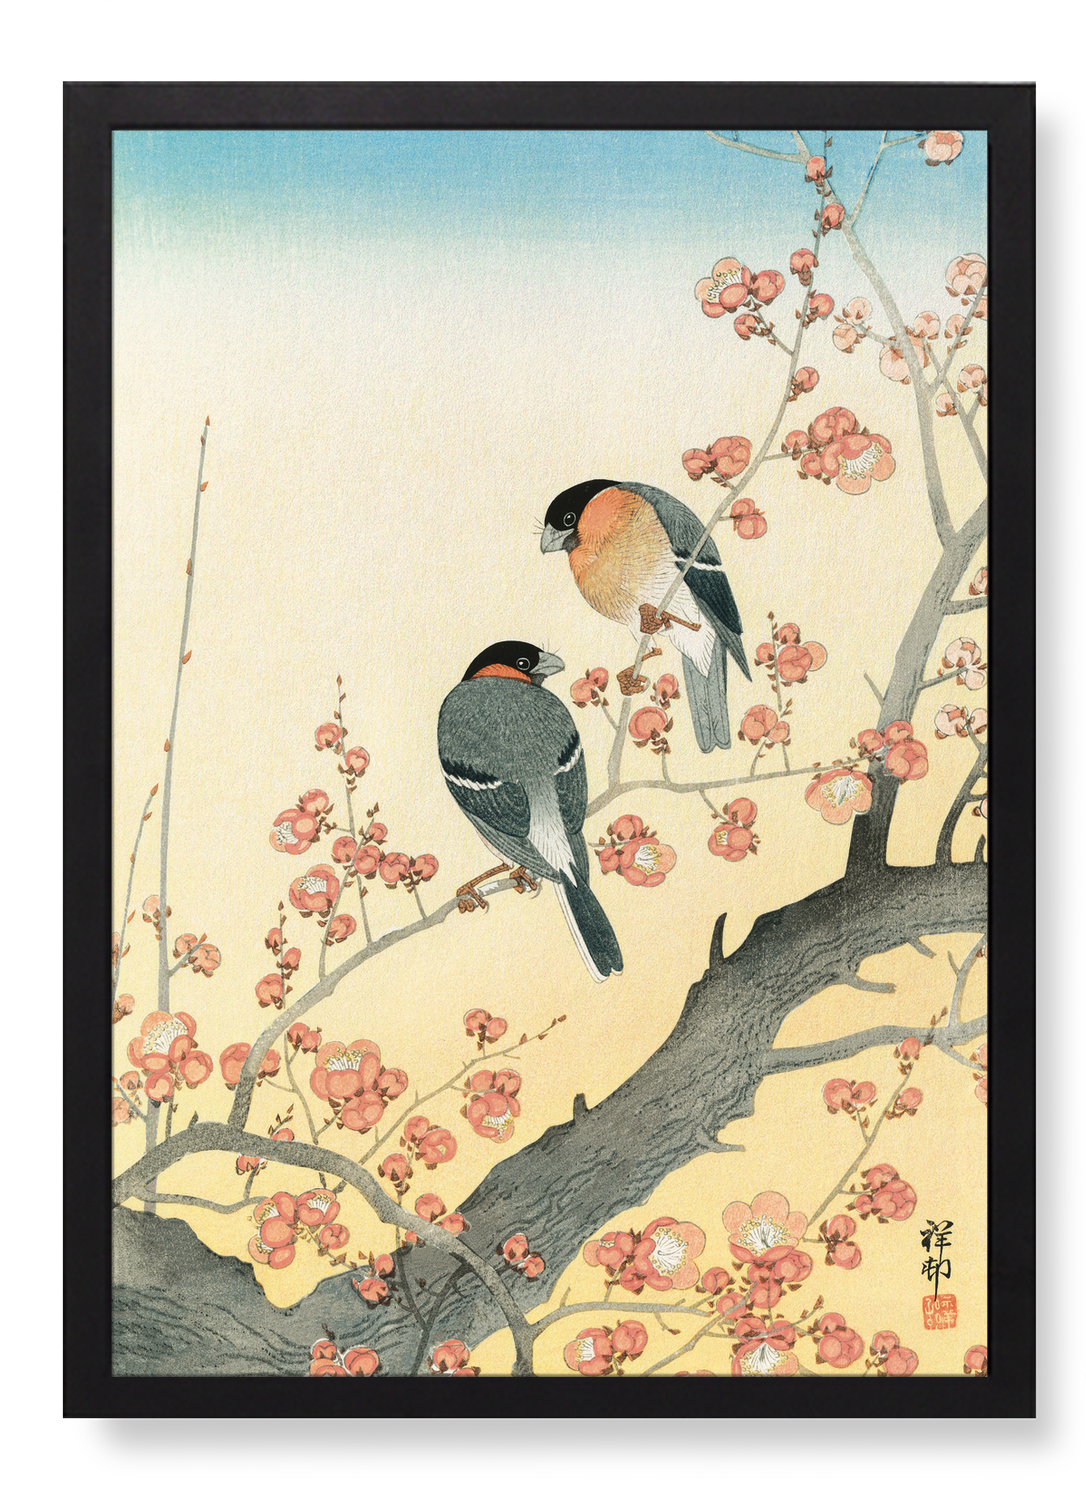 BULLFINCHES AND PLUM BLOSSOMS (C.1900)